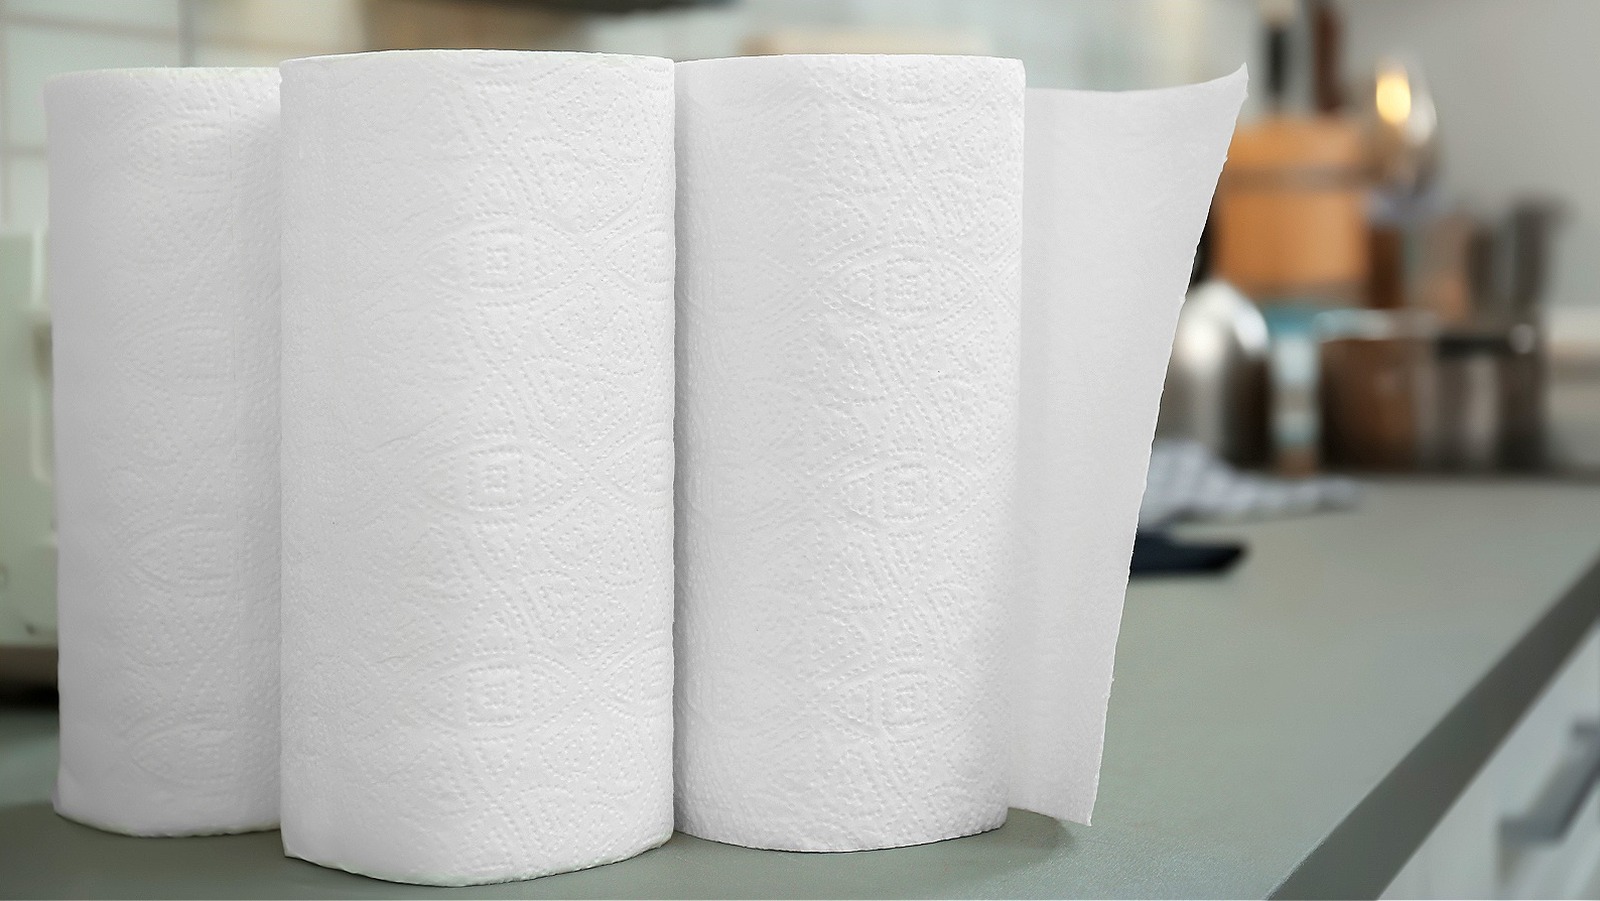 https://www.housedigest.com/img/gallery/the-easy-step-to-using-less-paper-towels-in-your-home/l-intro-1698688791.jpg